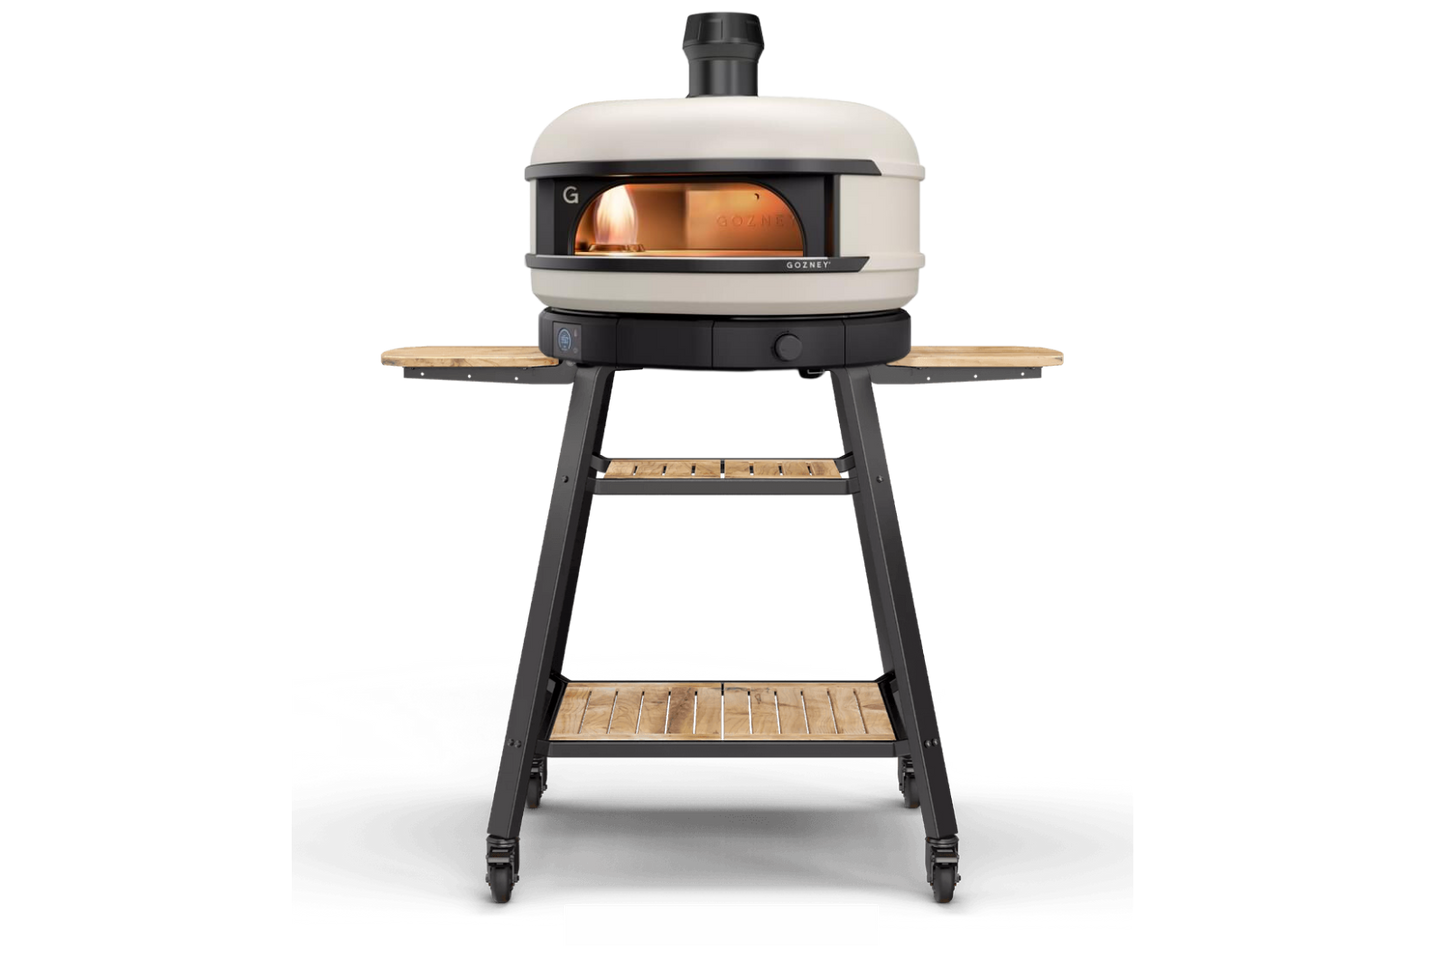 Gozney Dome S1 Propane Only Pizza Oven - White - On Stand